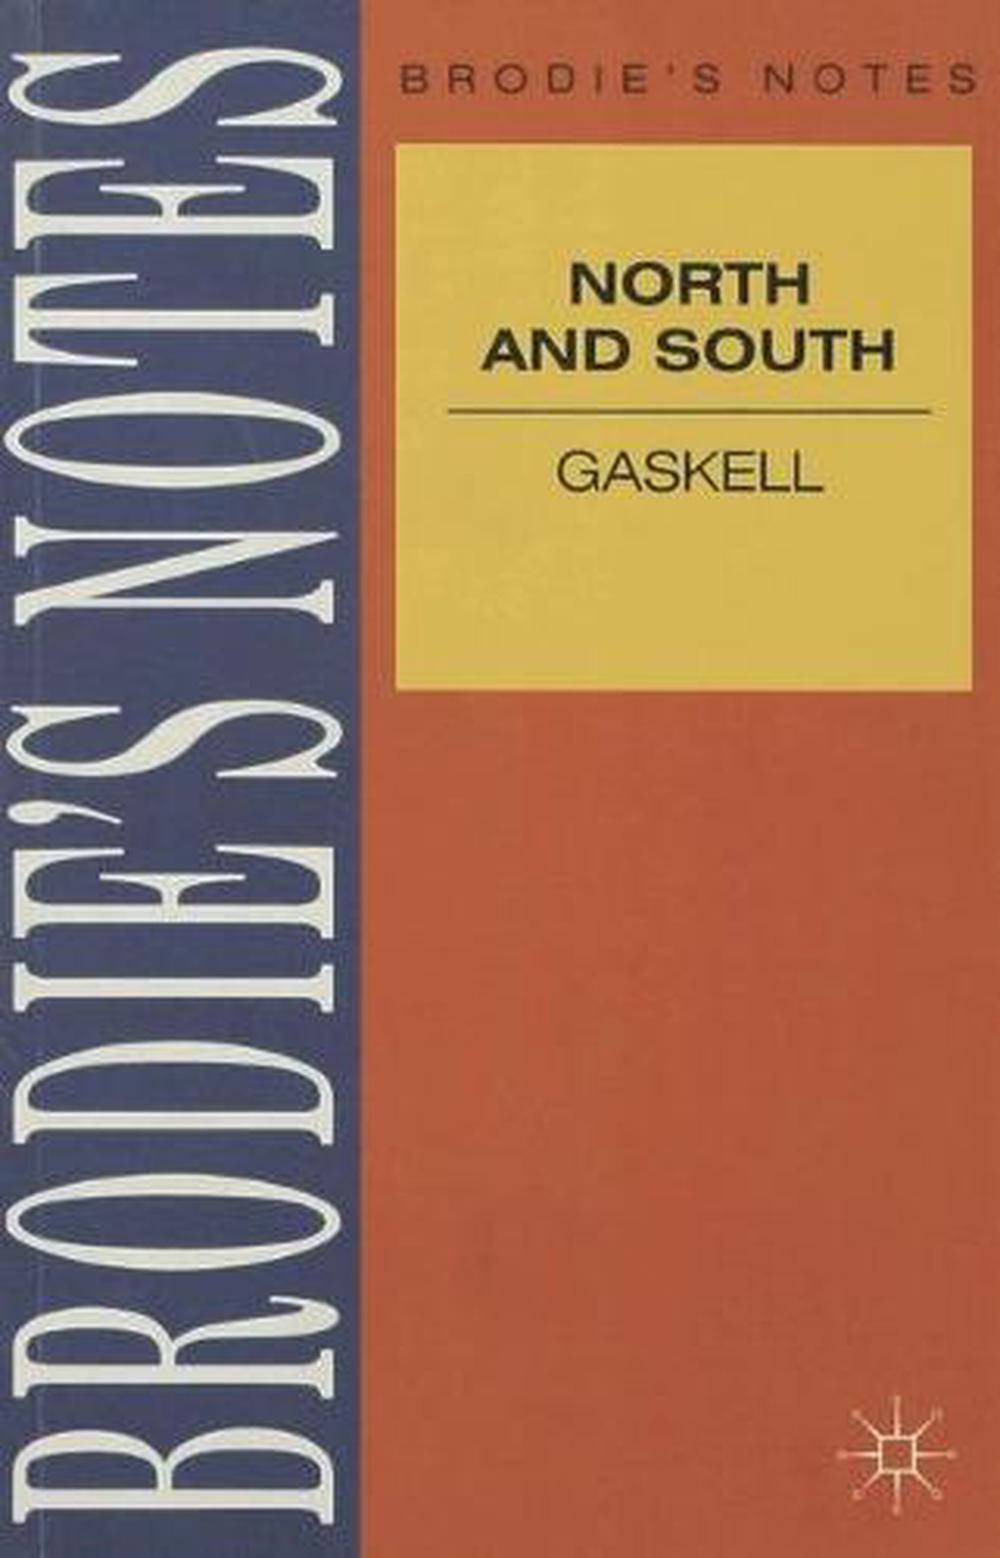 north and south novel by elizabeth gaskell